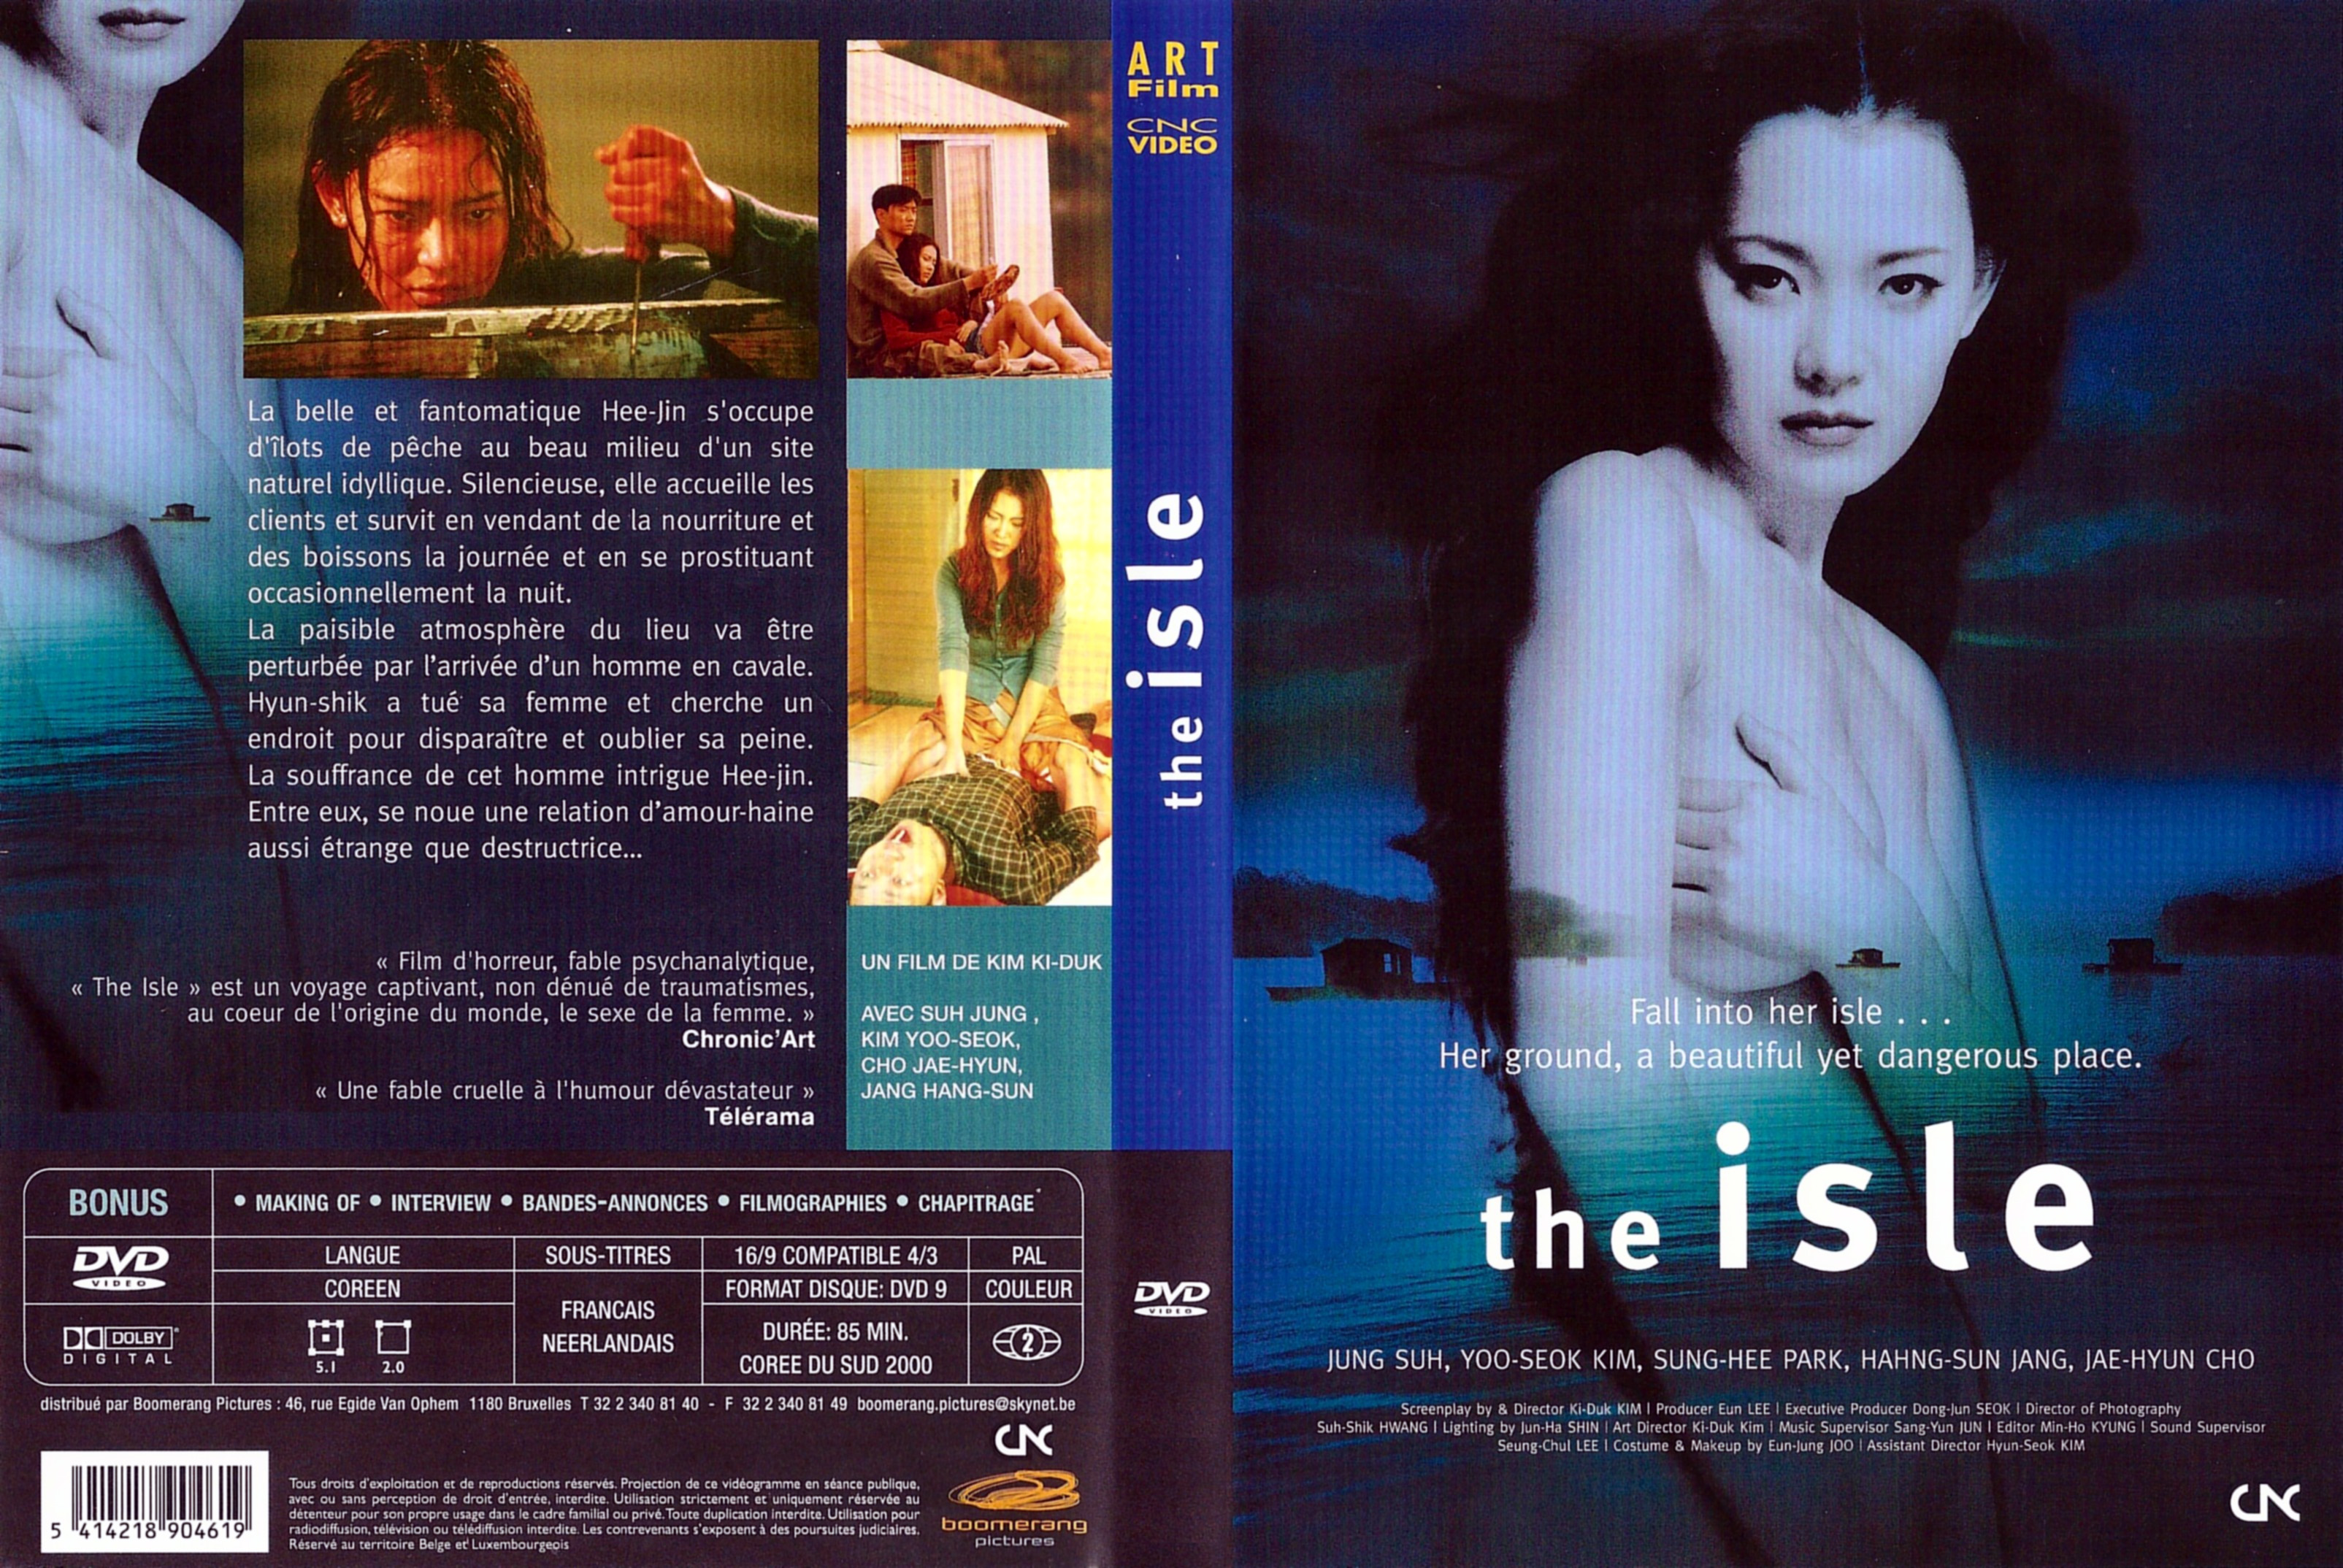 Jaquette DVD The Isle